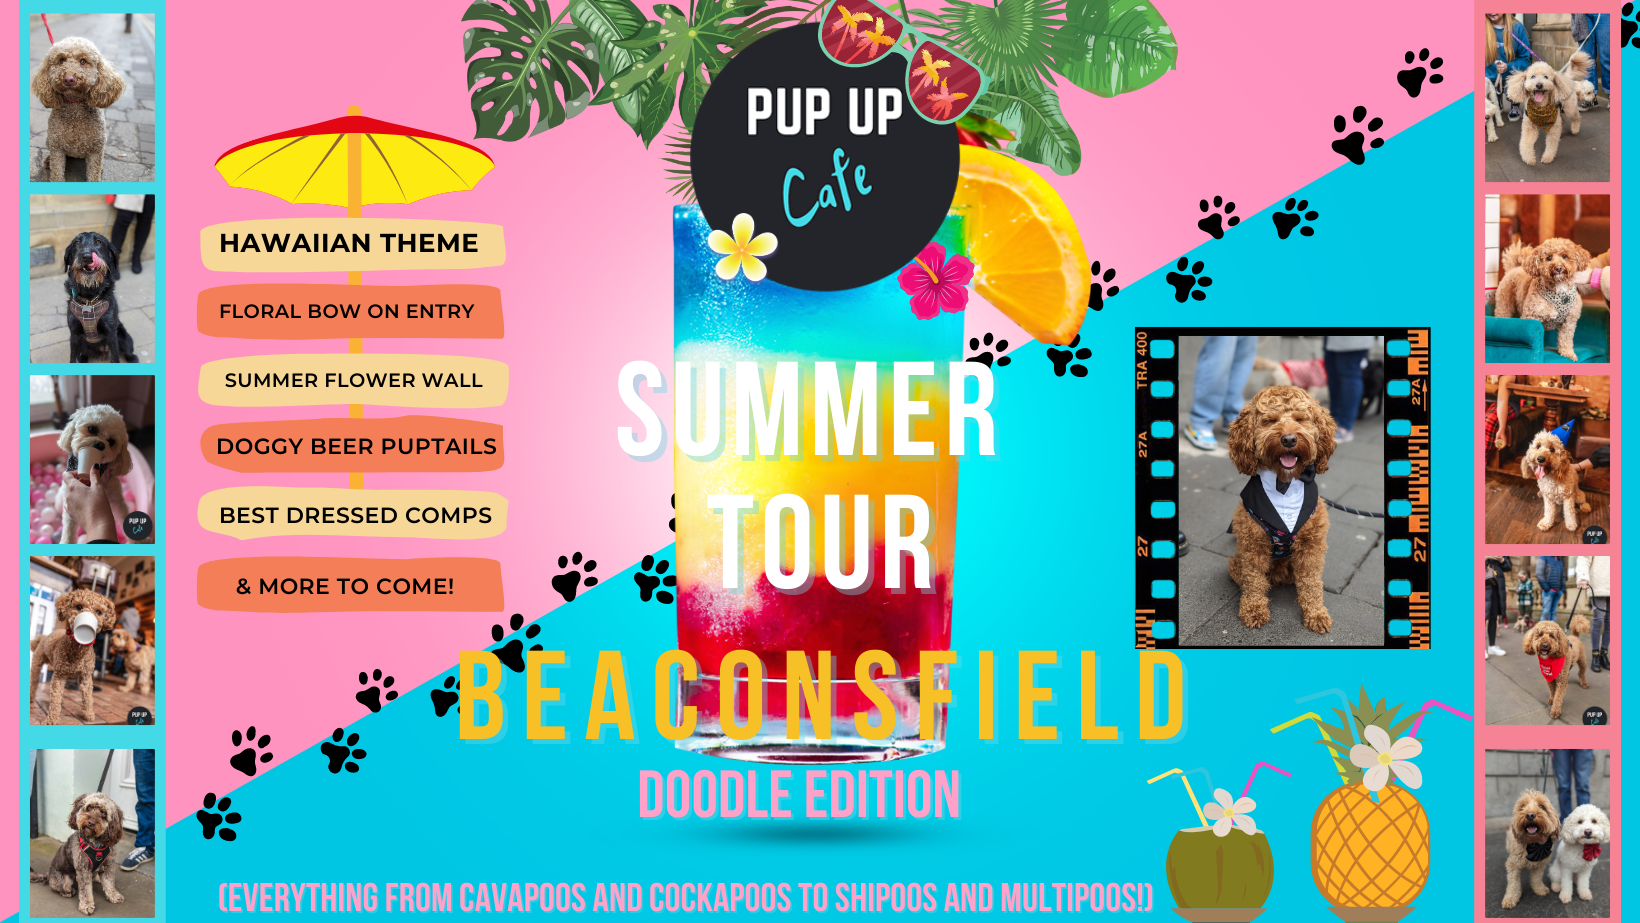 Doodle Pup Up Cafe – Beaconsfield | SUMMER TOUR! 🌞